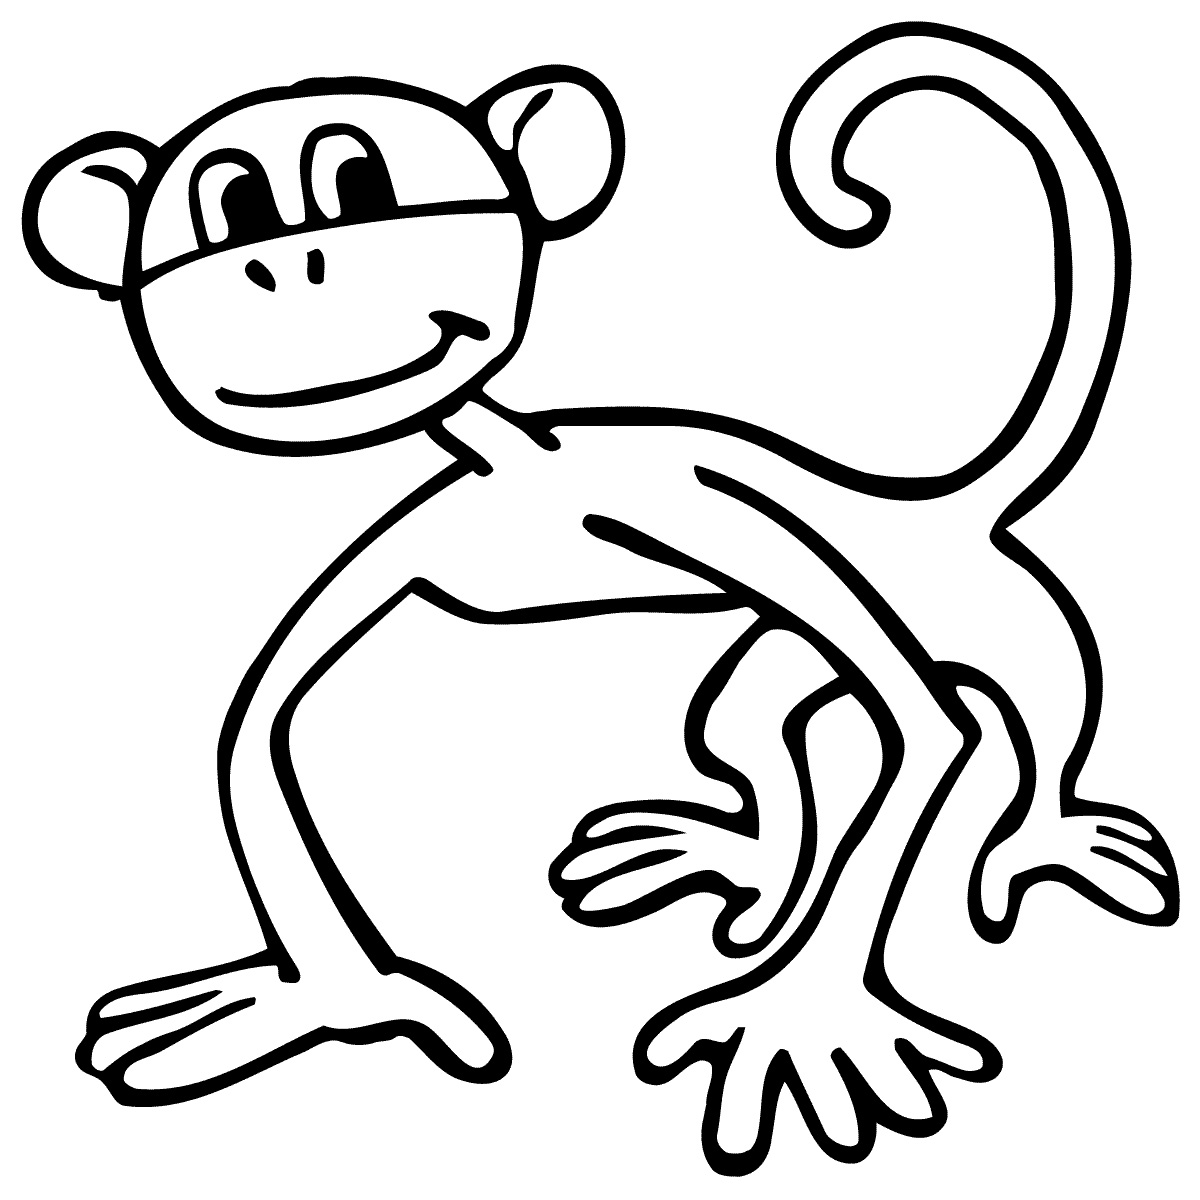 Funny Monkey Pictures   Cartoon Monkey Pictures   Desktop Background    